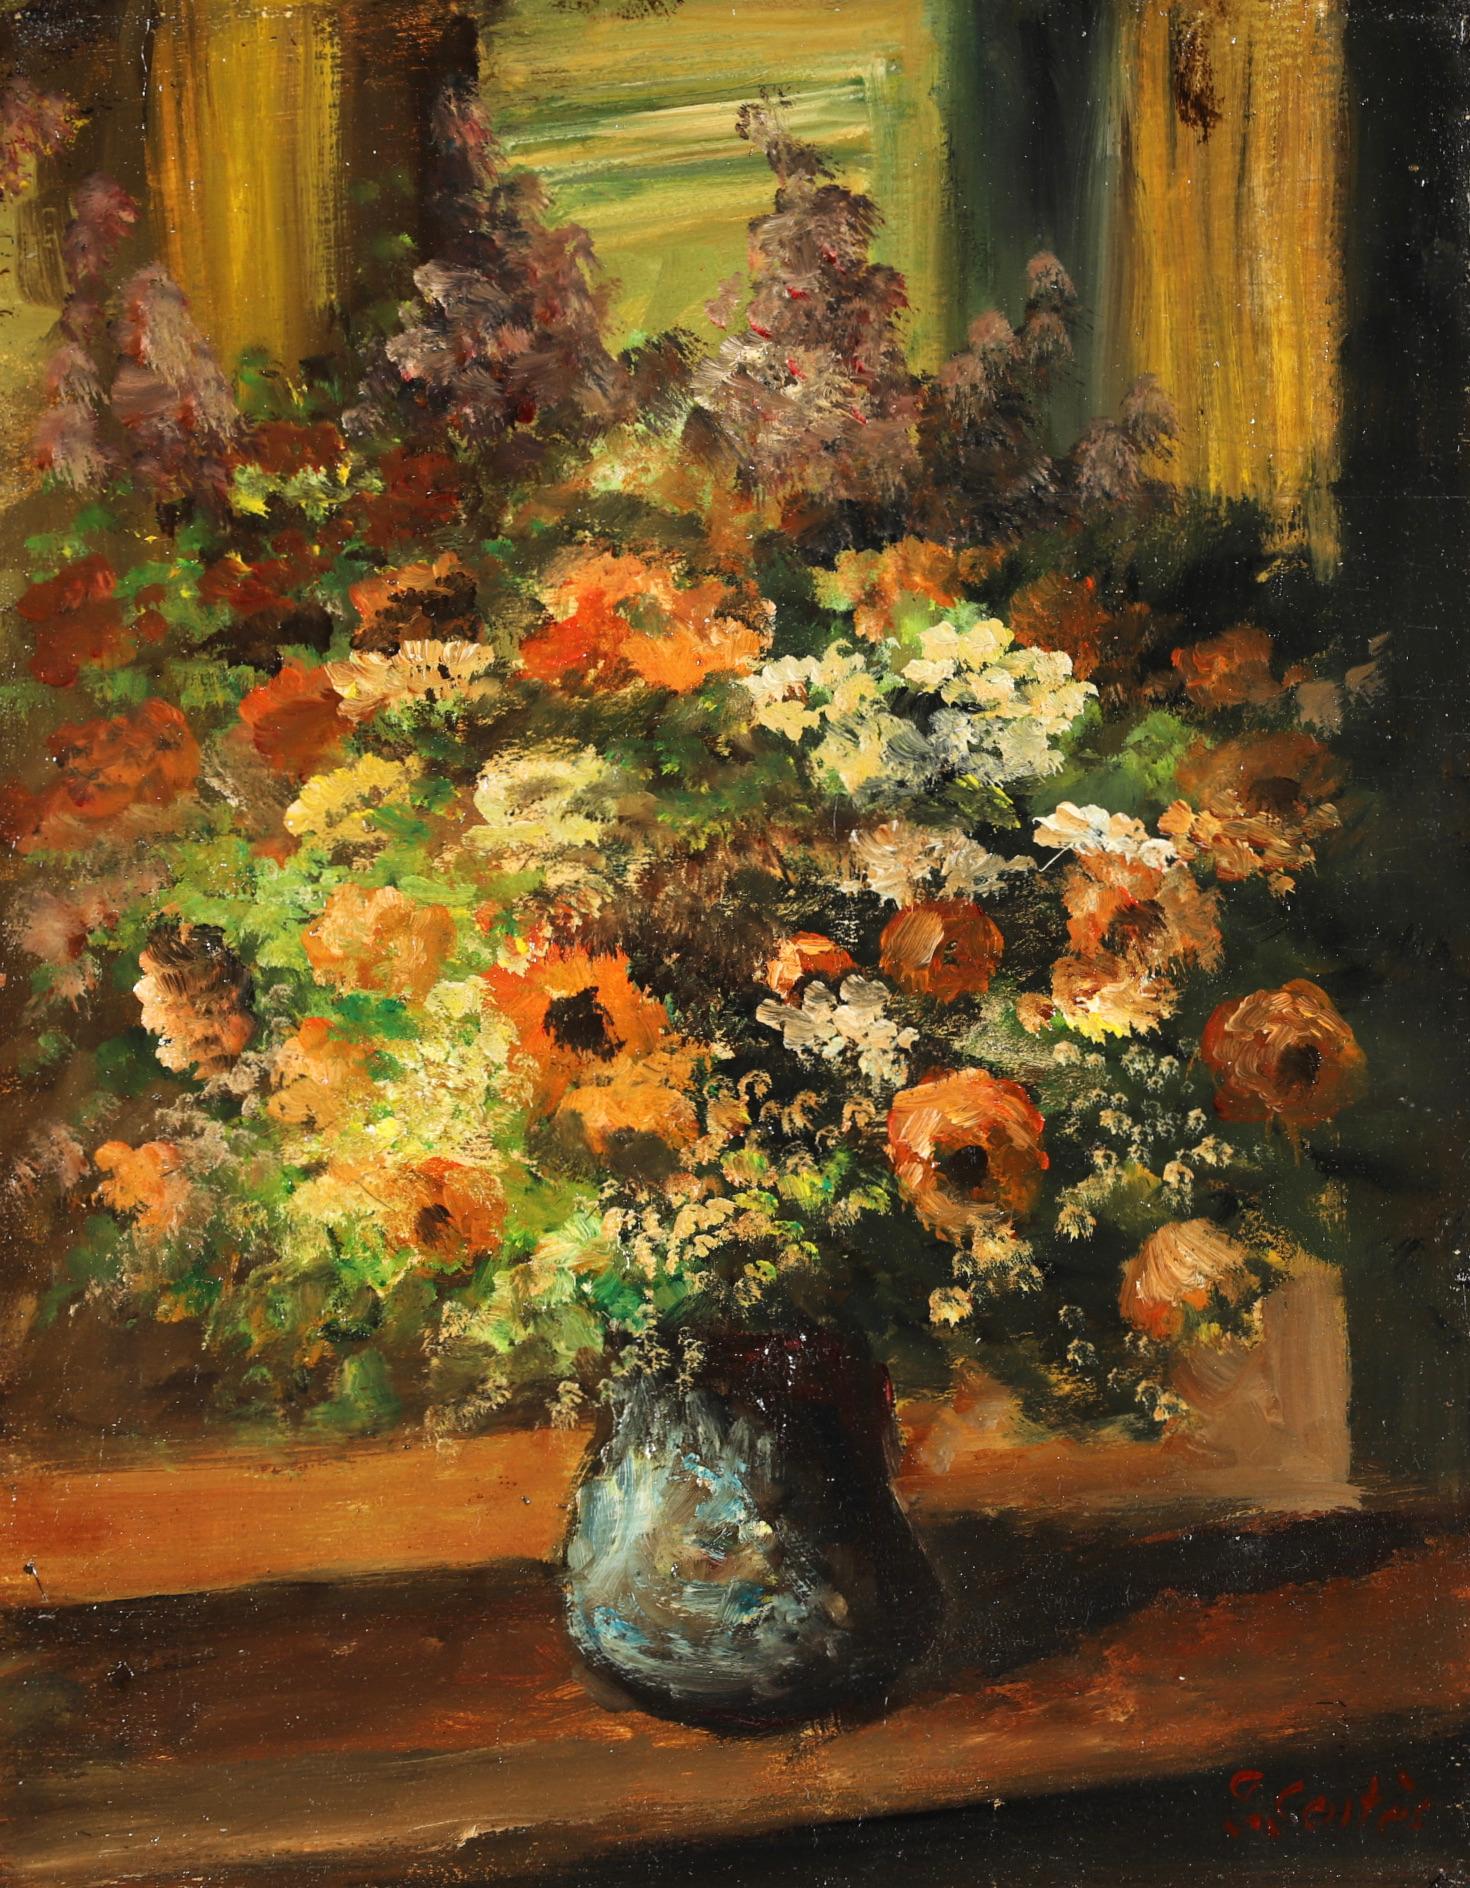 Signed impressionist oil on panel still life circa 1920 by French painter Edouard Cortes. The work depicts a vase of autumnal coloured flowers placed on a wooden ledge in front of a mirror. 

Signature:
Signed lower right

Dimensions:
Framed: